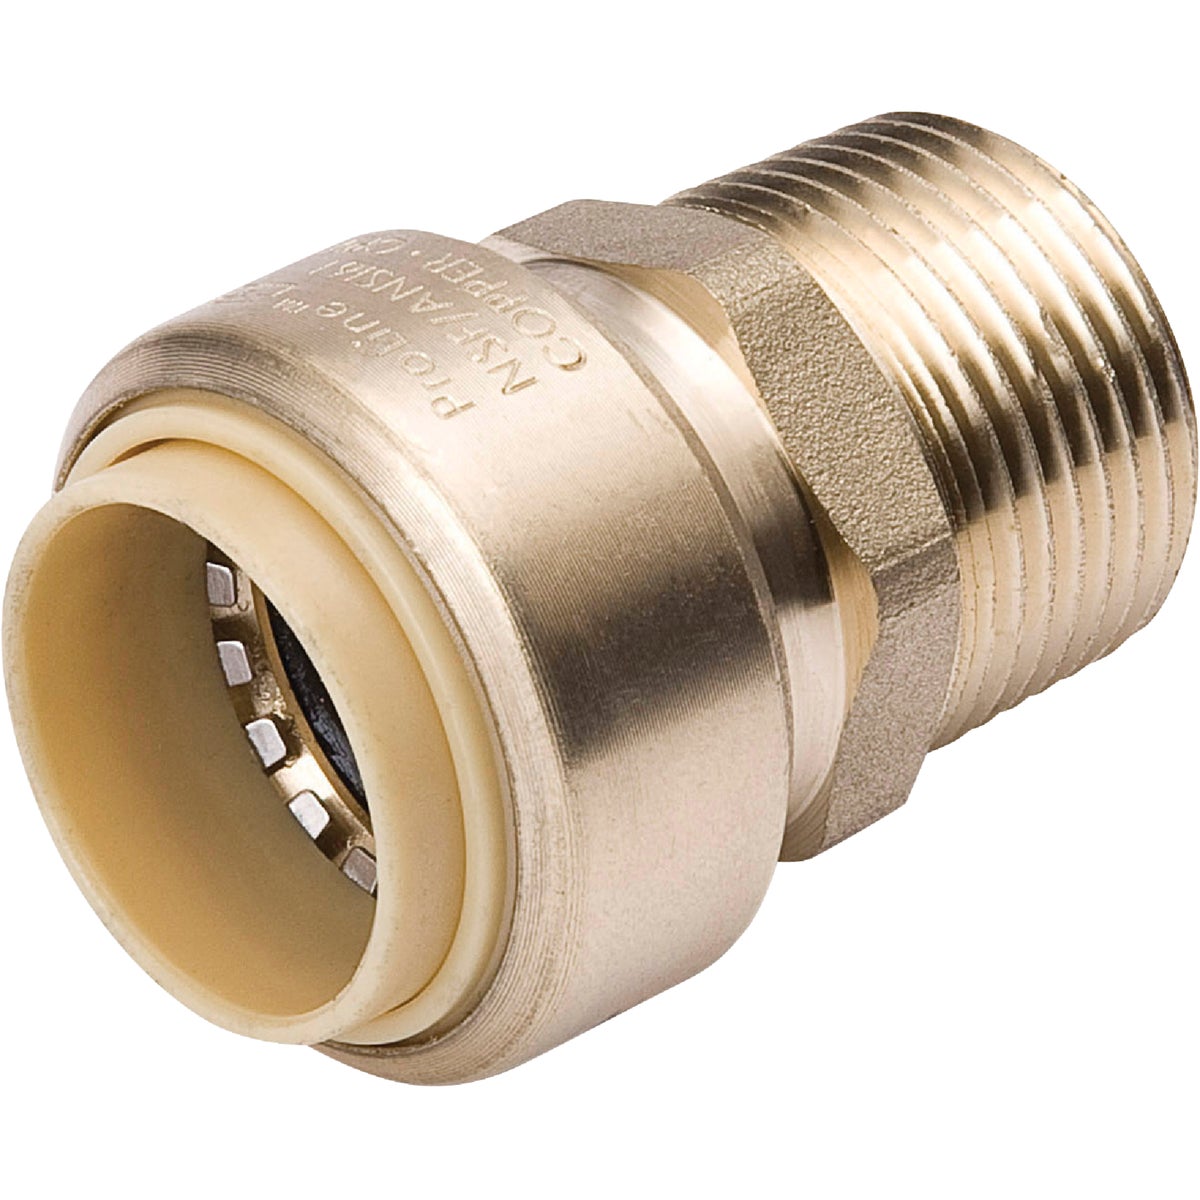 Item 400994, Brass Push Fit x MPT (male pipe thread) adapter.